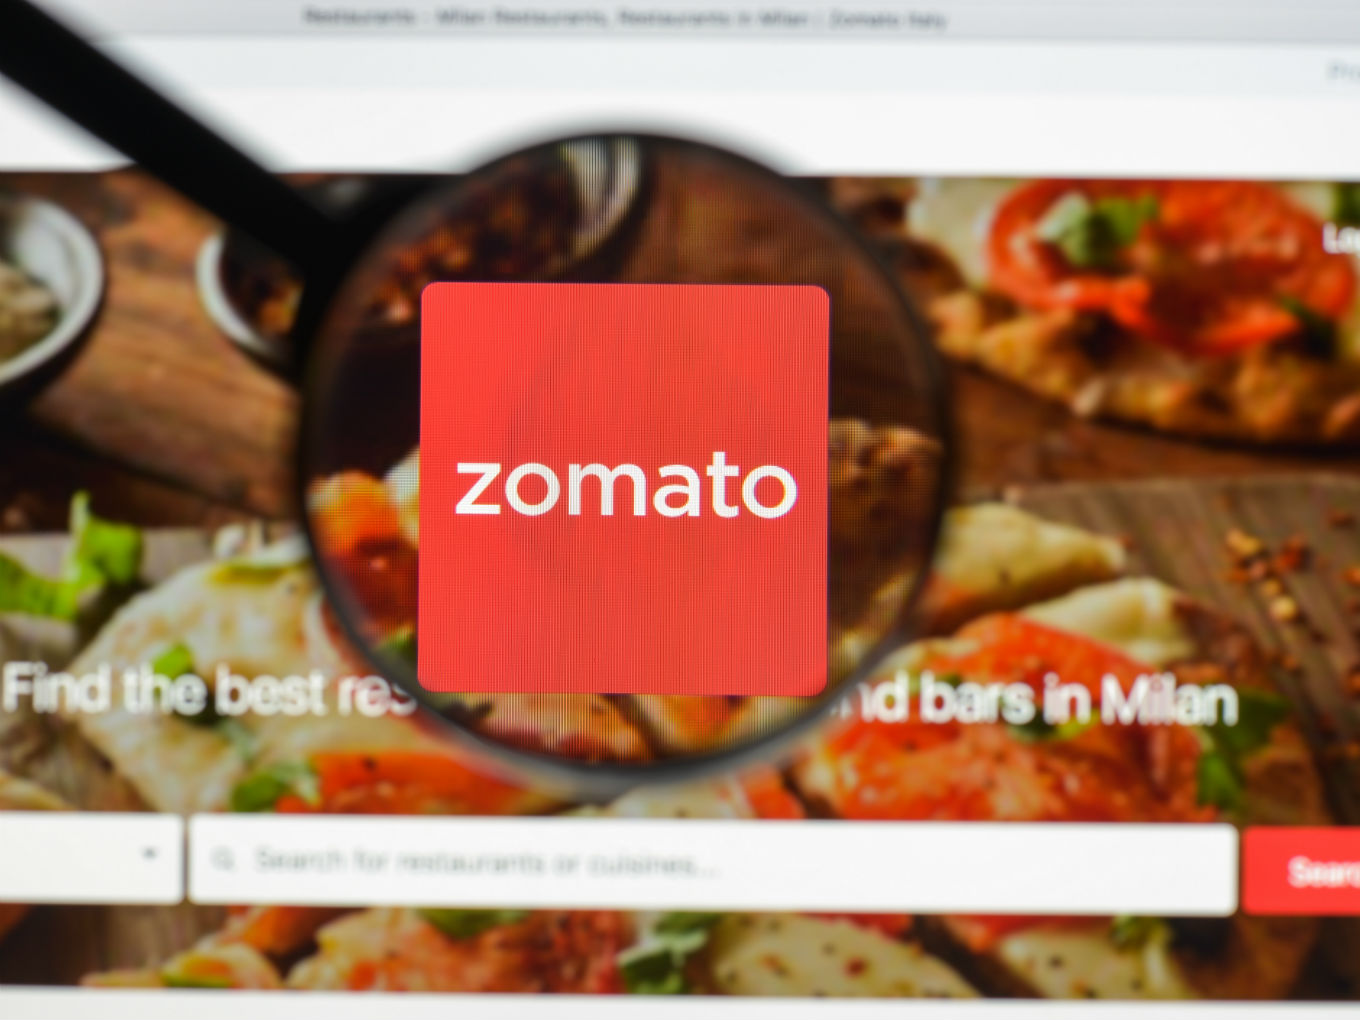 Zomato May Raise $550 Mn Funding Round Led By Ant Financial